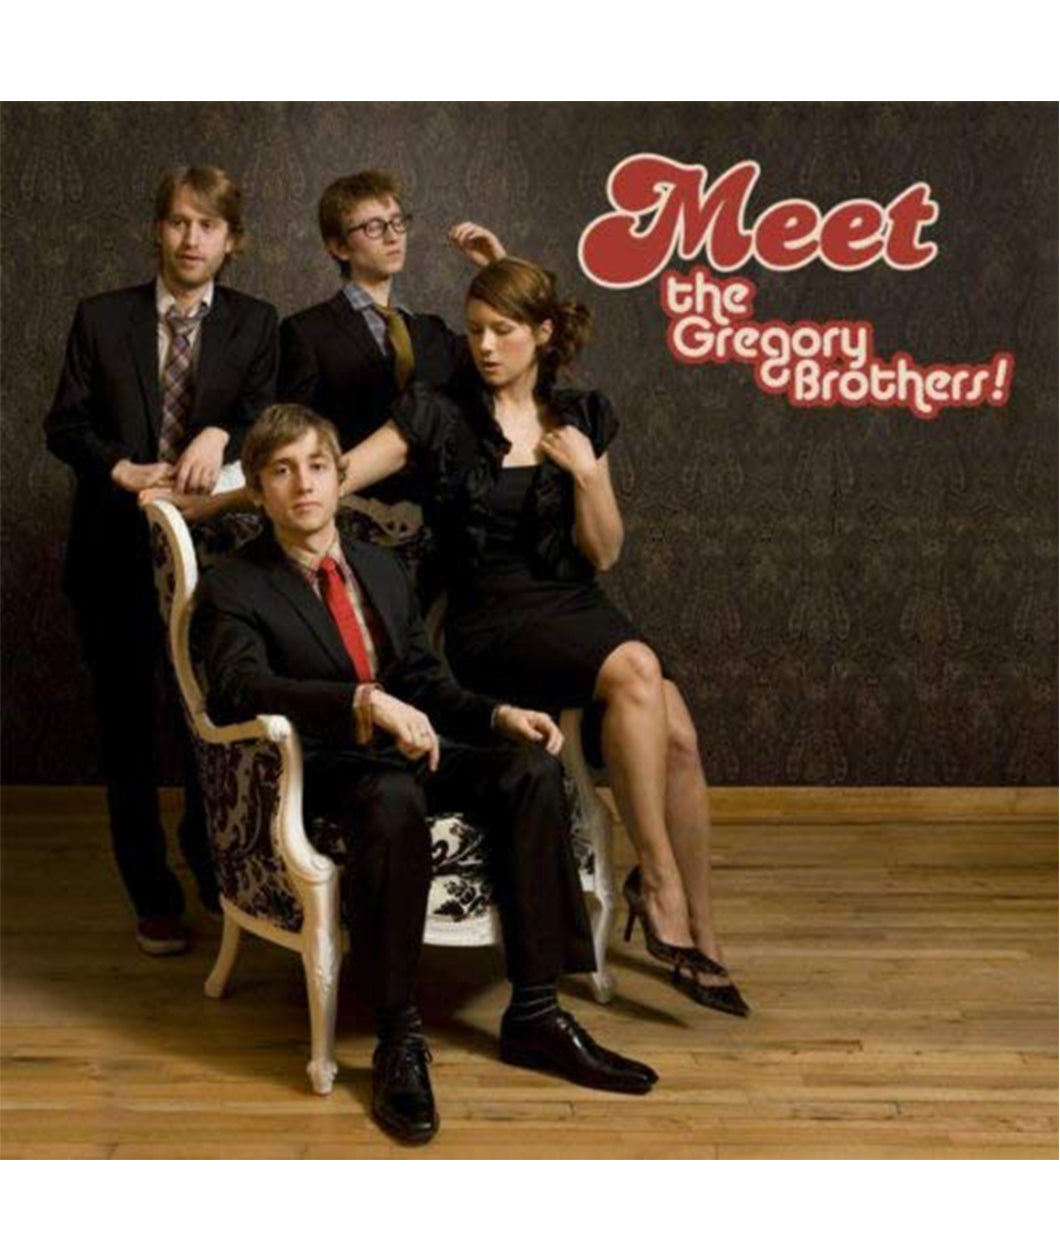 An album cover featuring four people posed in suits and a dress. On the cover it reads 